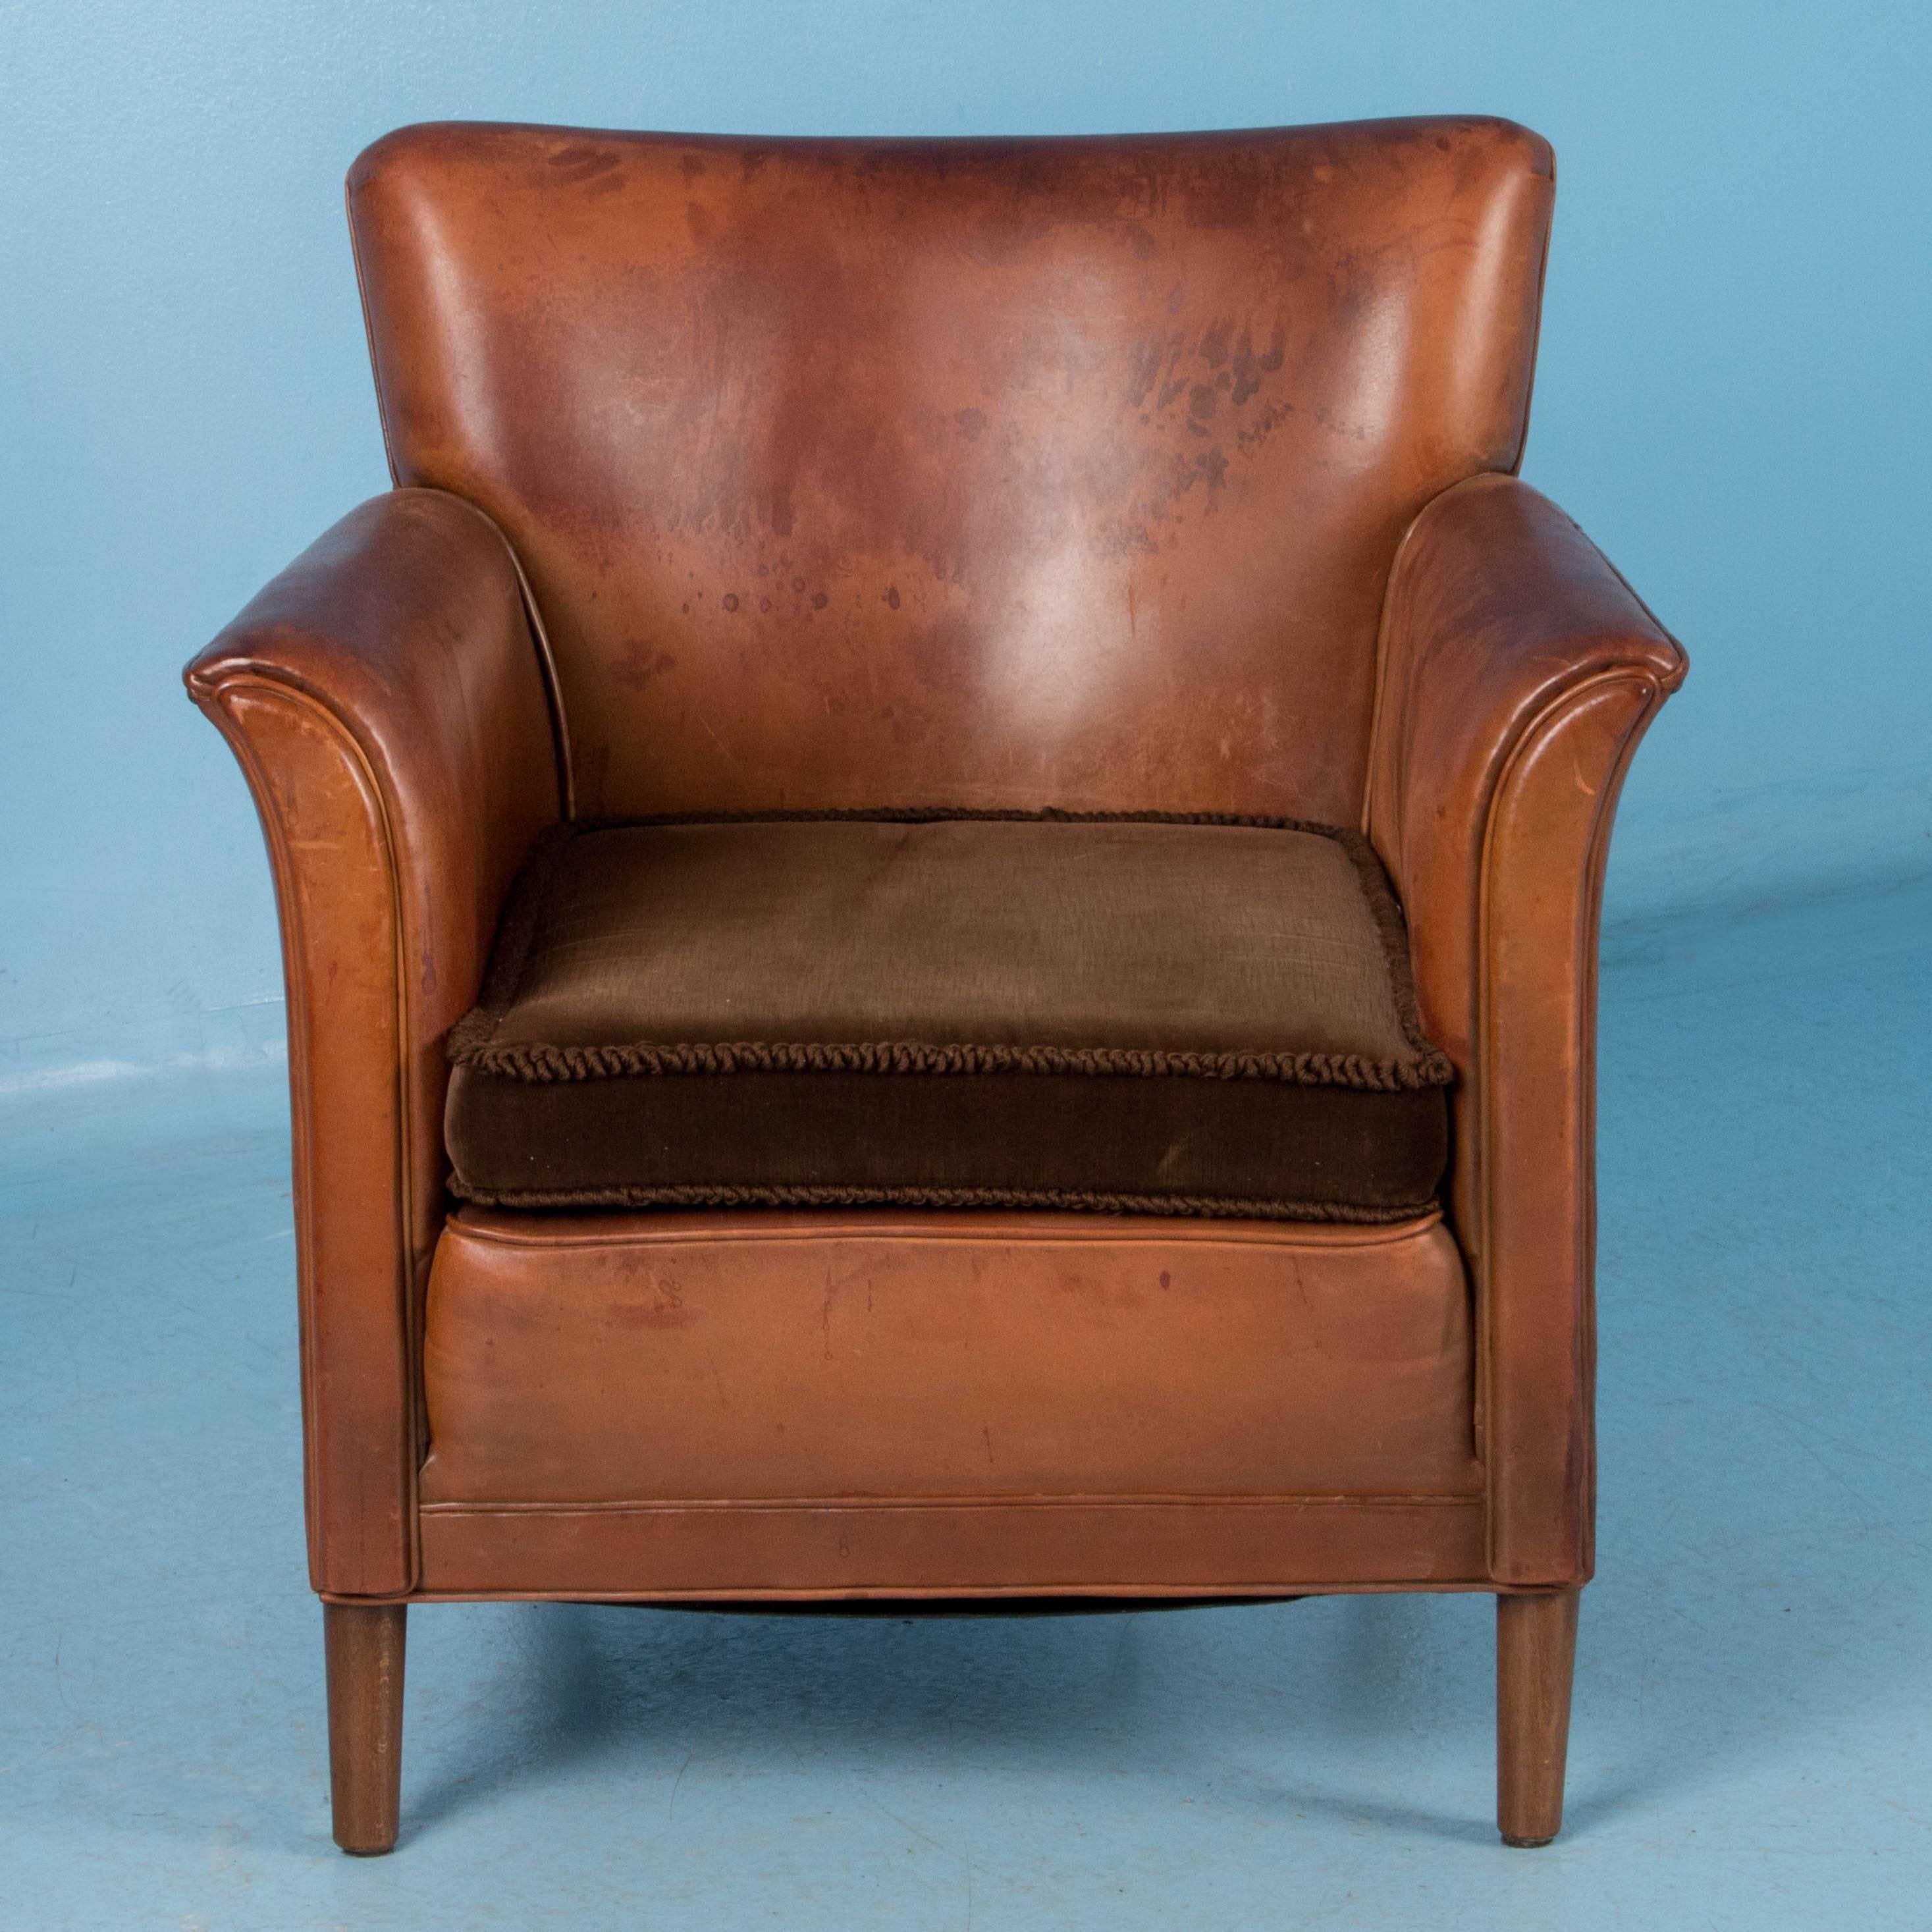 20th Century Pair of Vintage Danish Leather Club Chairs with Cushion Seats